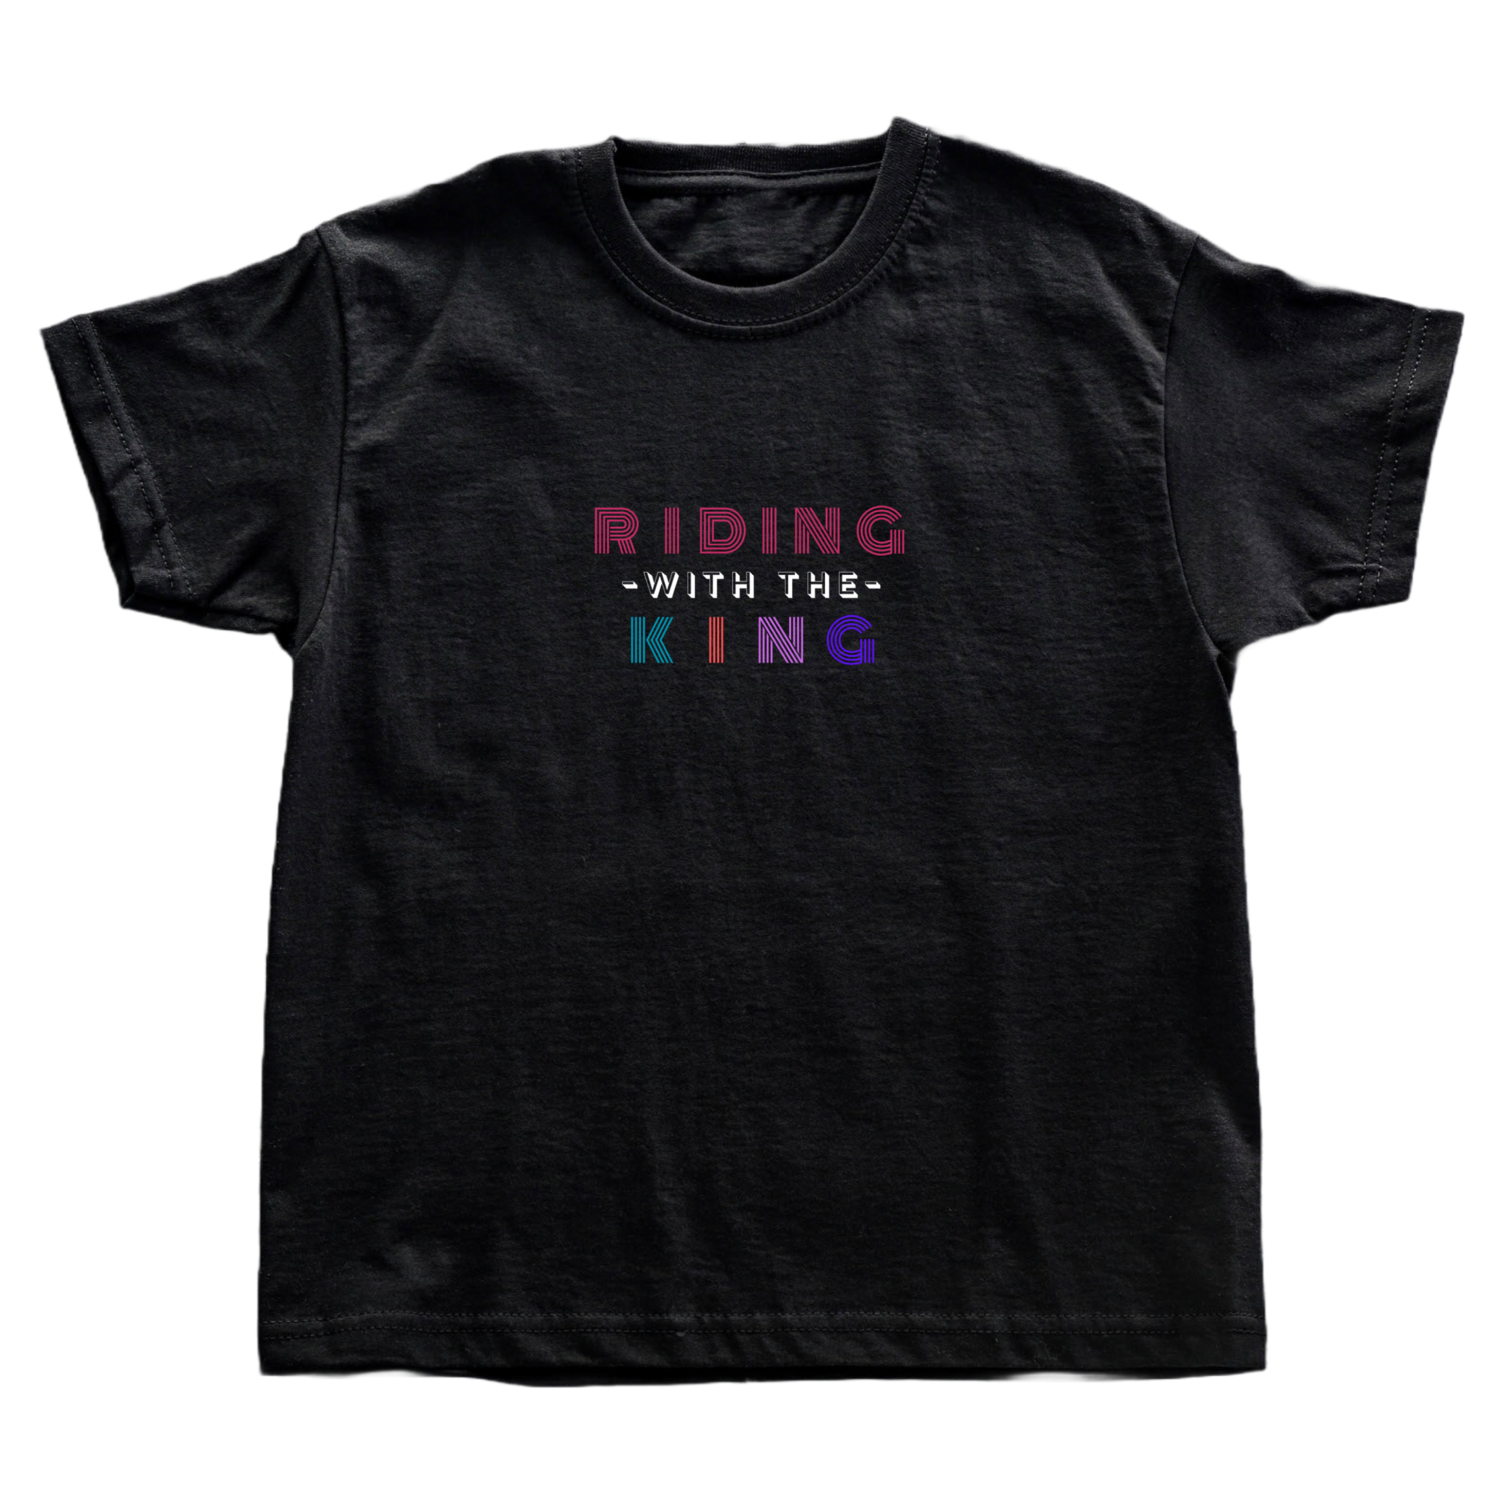 "Riding with the King" Unisex T-Shirt